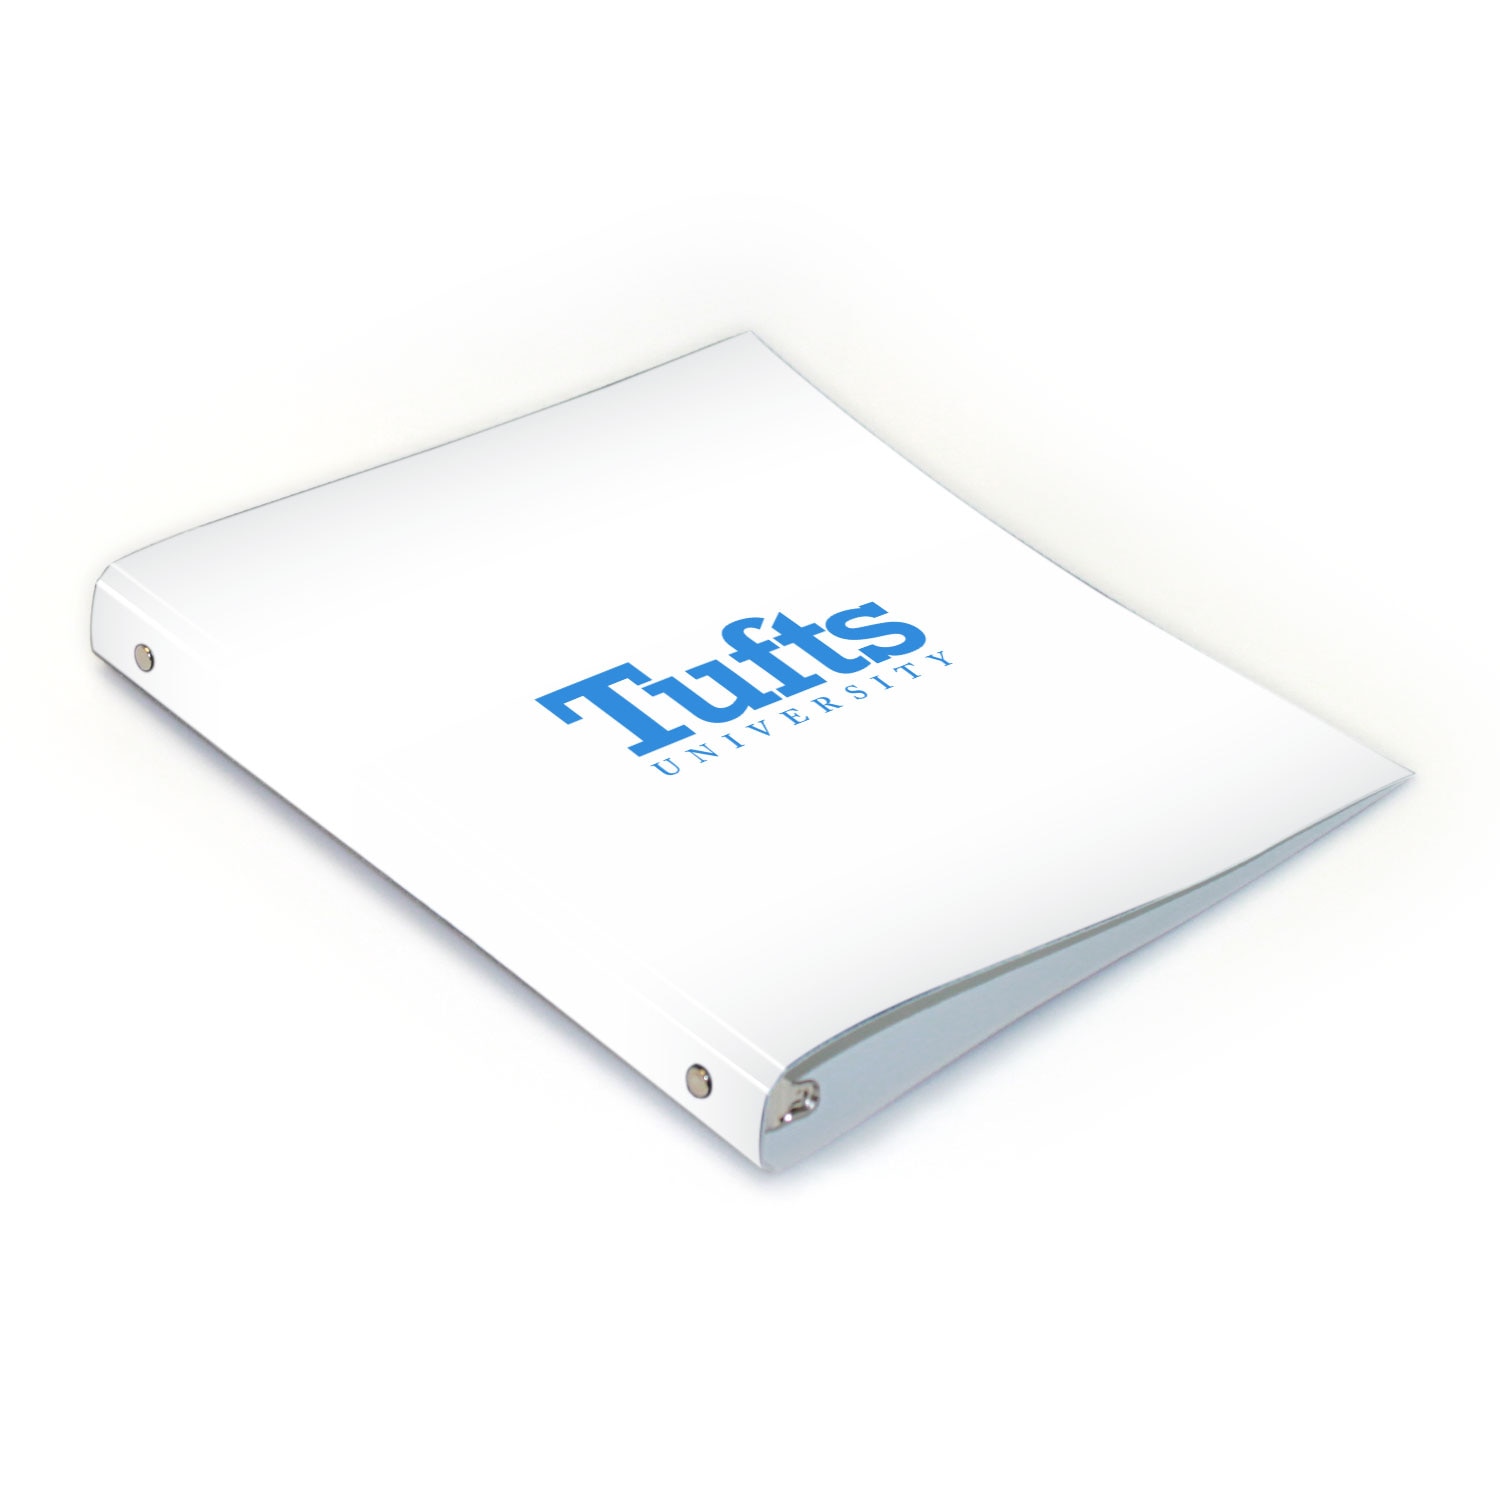 Tufts Full Color 2 sided Imprinted Flexible 1" Logo 2 Binder 10.5" x 11.5"